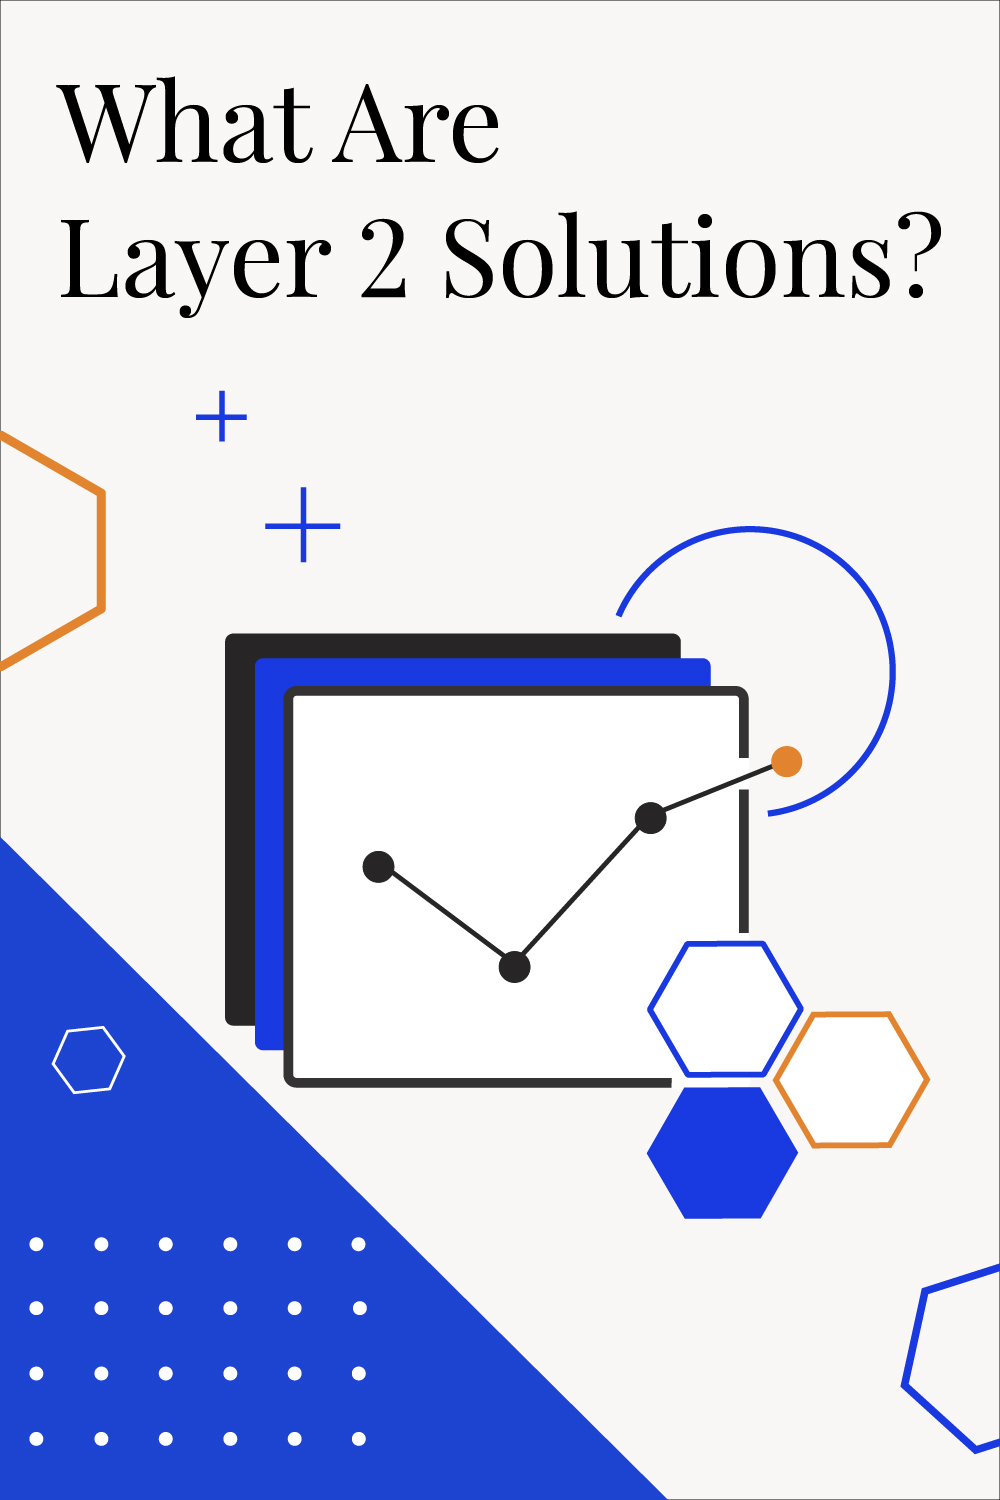 What Are Layer 2 Solutions [Like Polygon, Immutable, and Arbitrum]